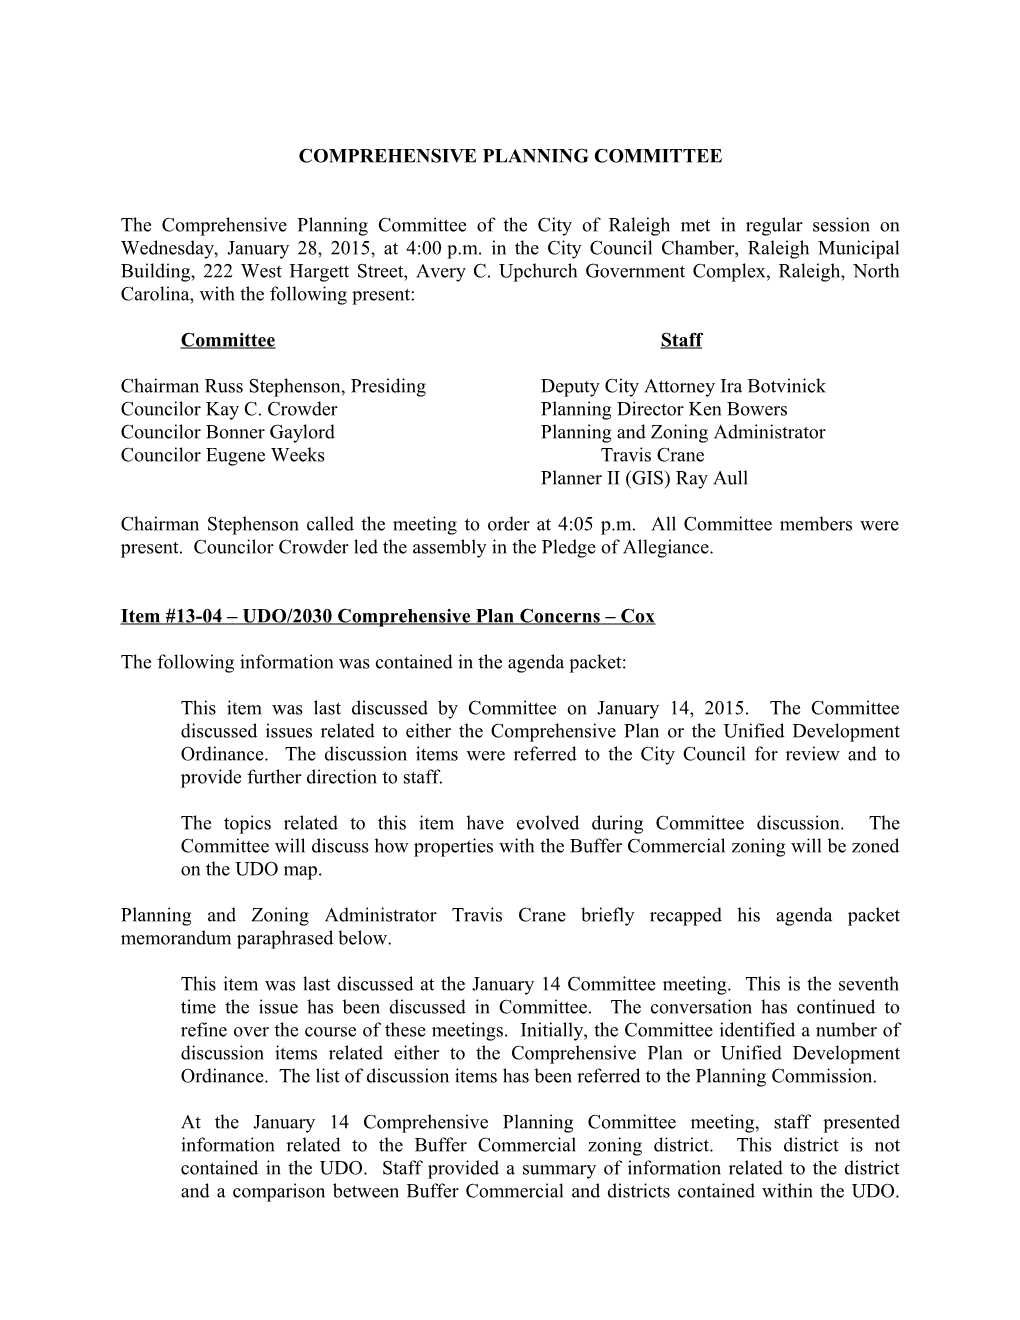 Comprehensive Planning Committee Minutes - 01/28/2015